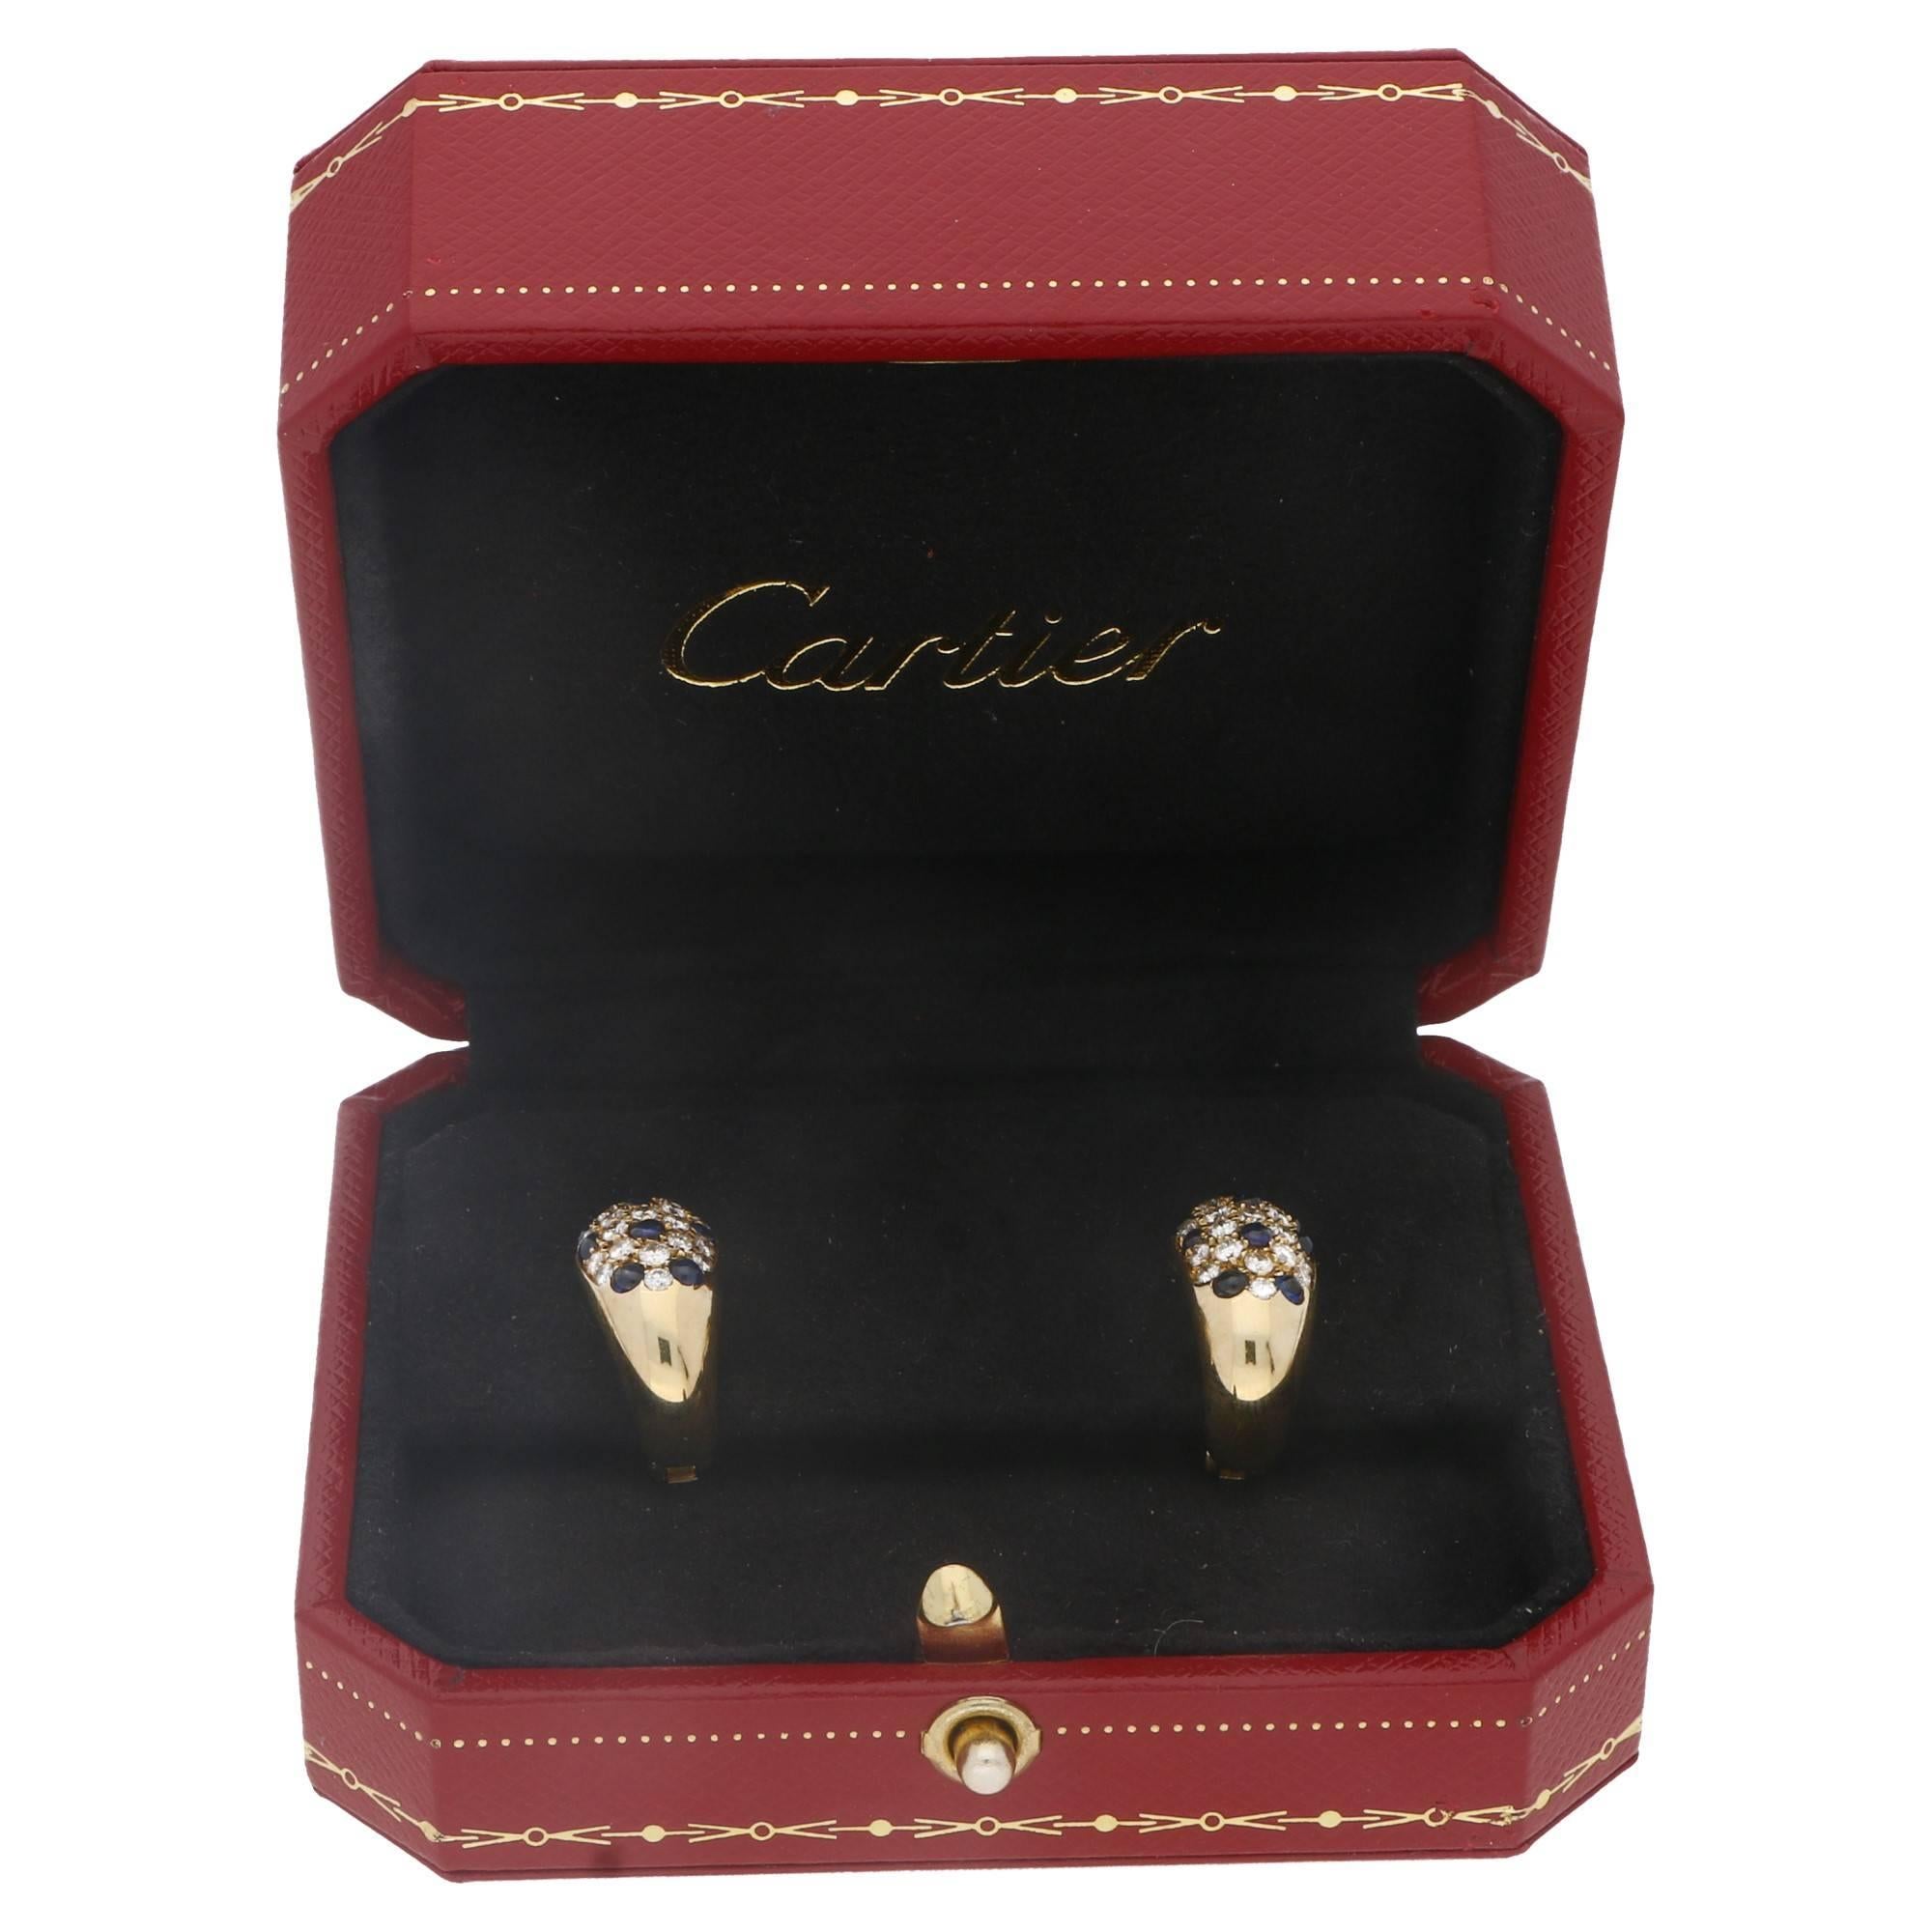 Diamond and blue sapphire set 18K yellow gold earrings by Cartier. These are set with round brilliant cut diamonds and striking blue sapphire cabochons. Hallmarked: Cartier, 1989. On post and clip fittings